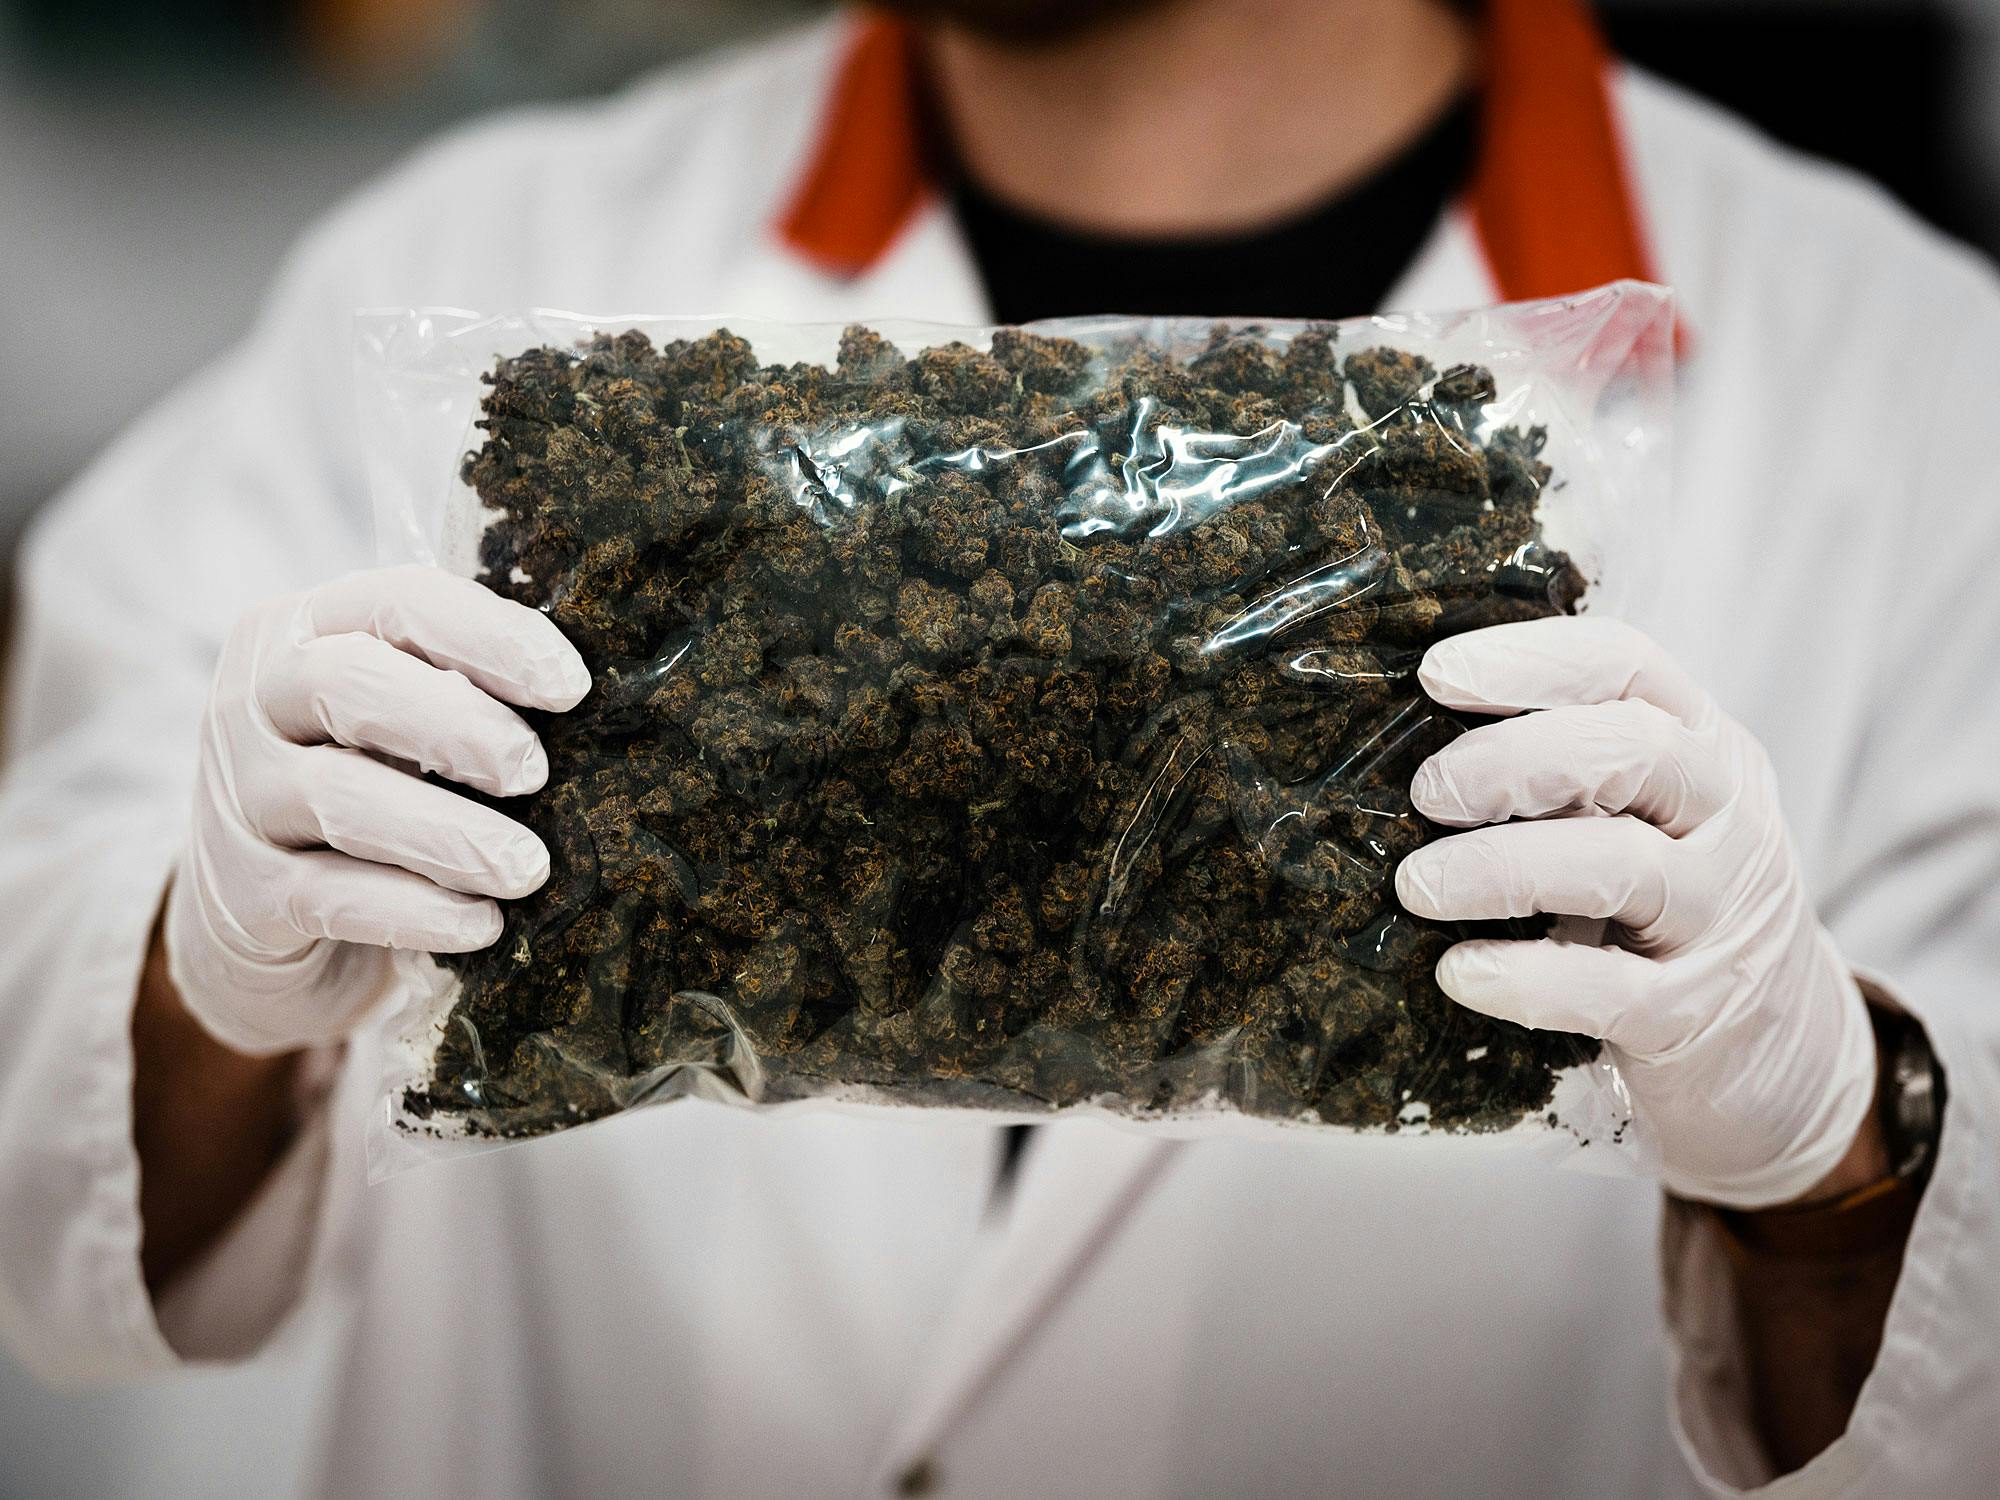 An employee at Green Relief holds up a bag of cannabis at the Green Relief laboratories in Hamilton, Ontario. Canada doesn't have enough weed for legalization day—even though it's just around the corner.